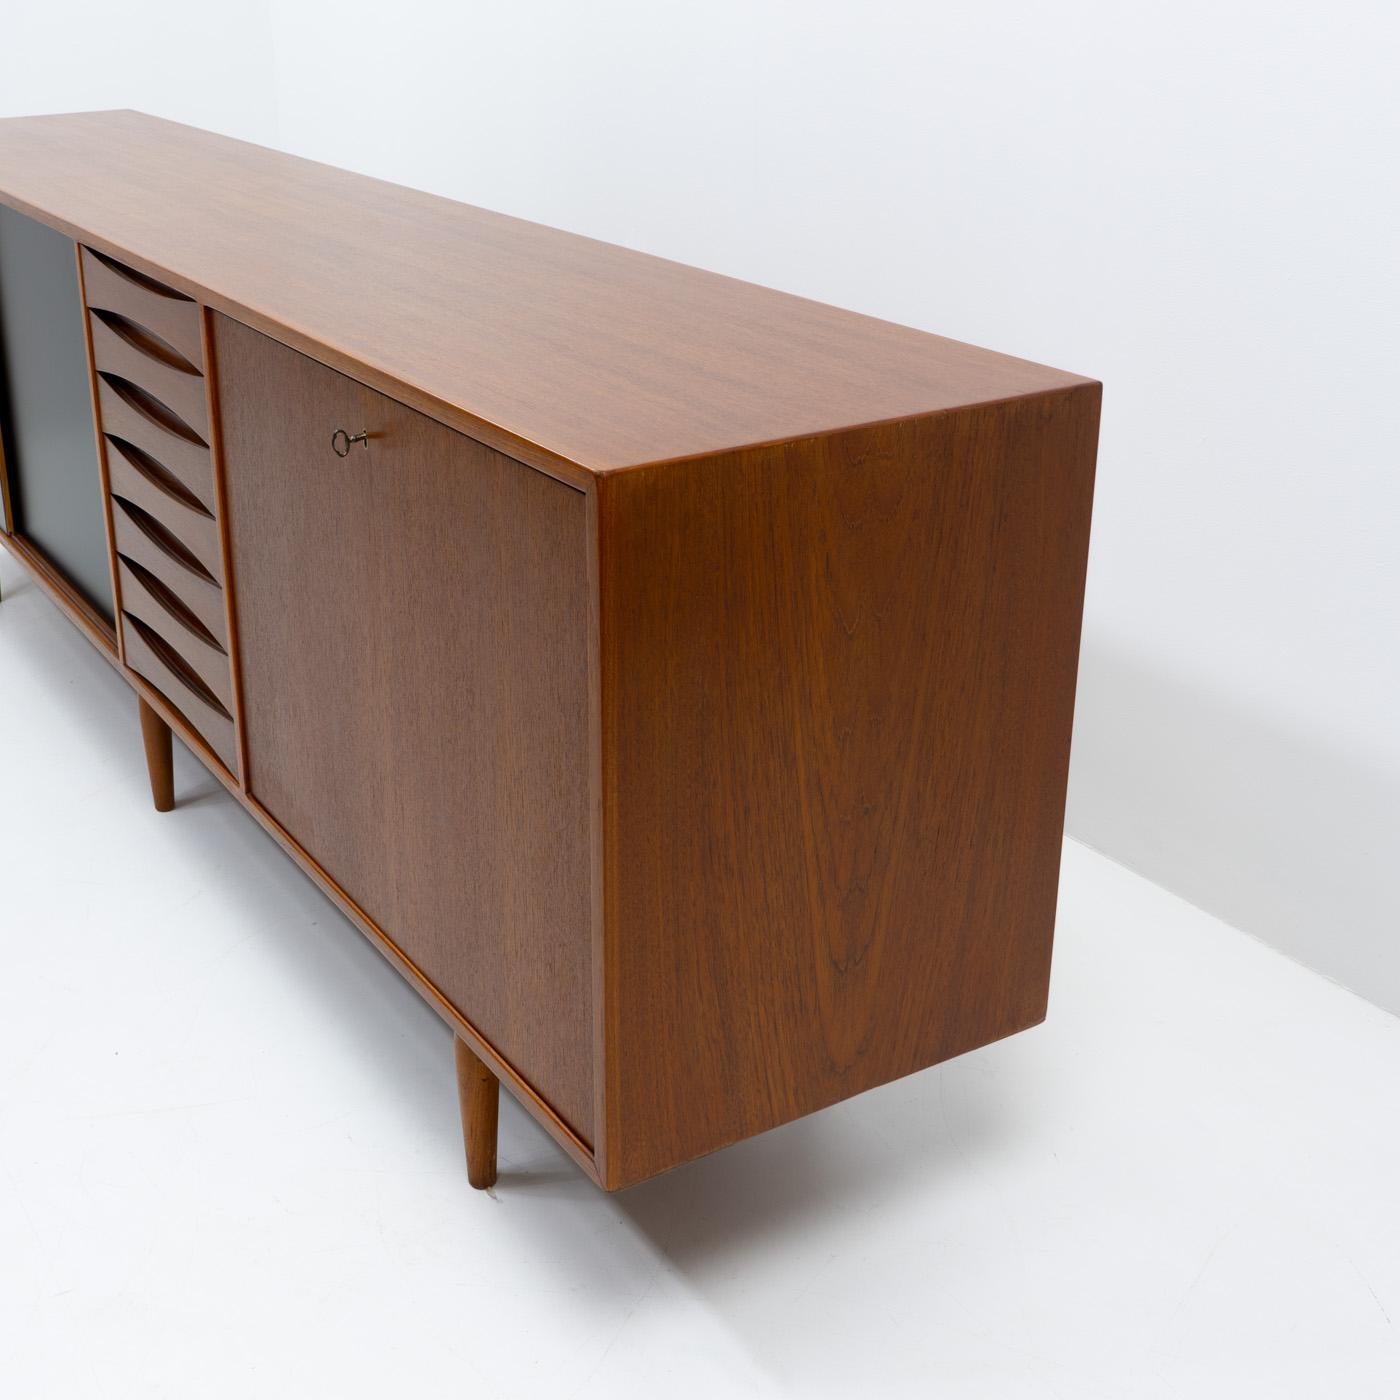 Mid-20th Century Danish Design Classic Arne Voder for Sibast, Triennale Sideboard, 1950s For Sale